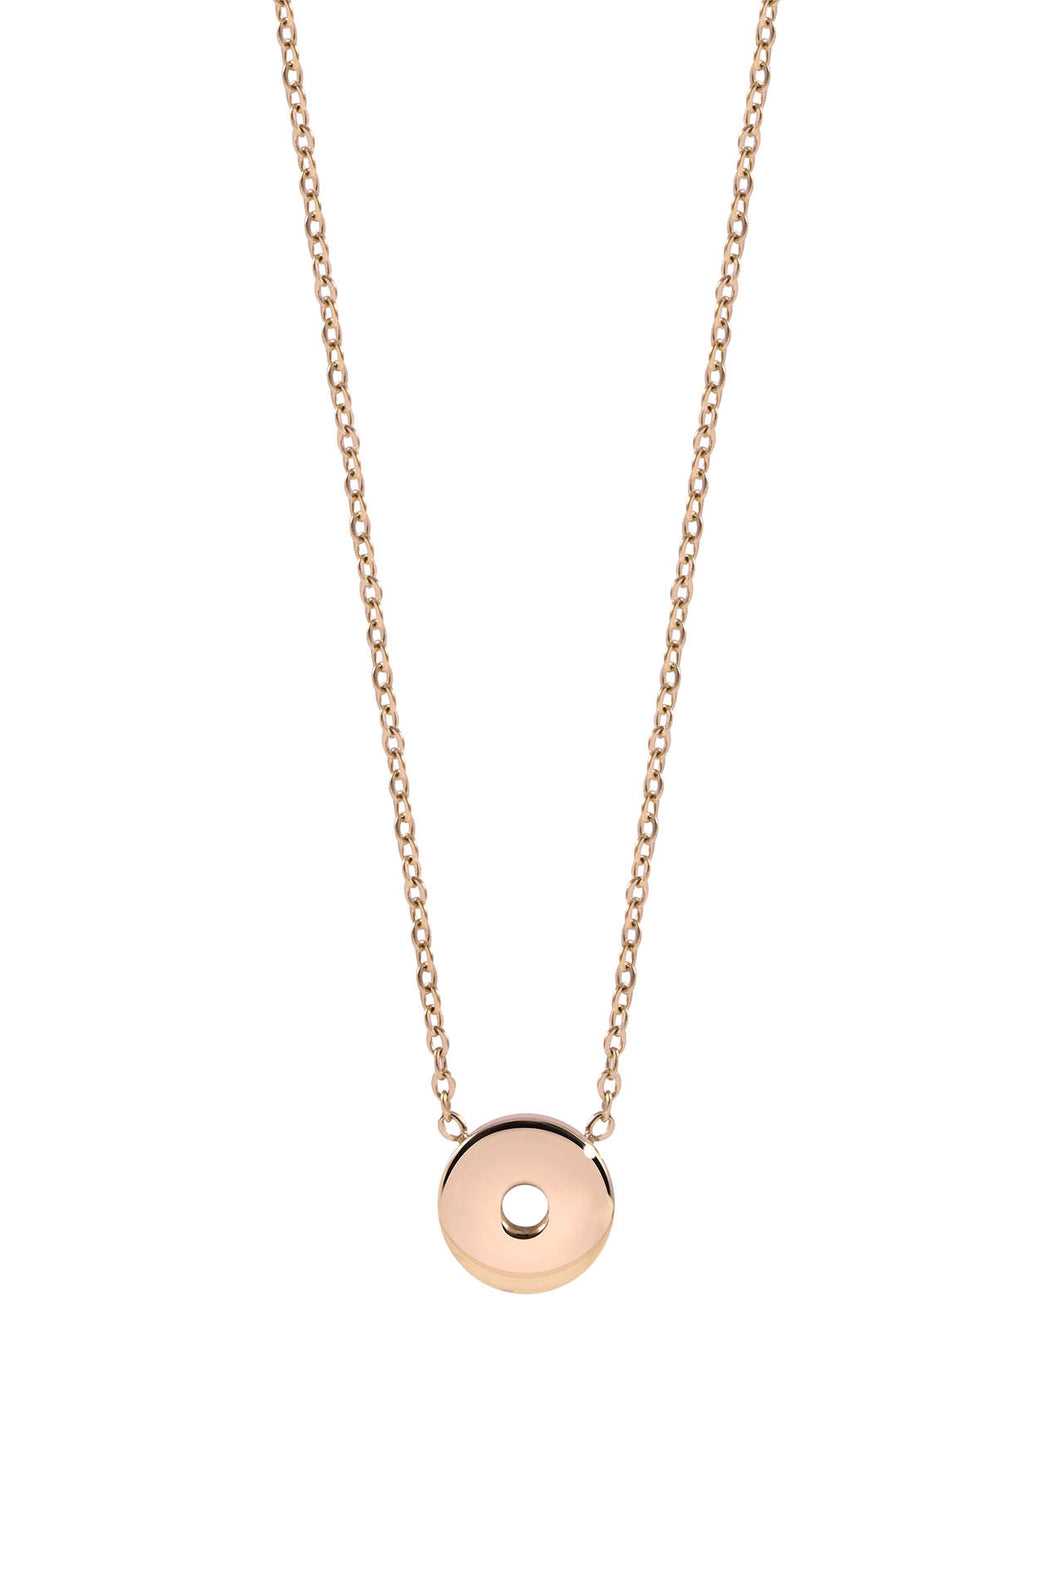 QUDO INTERCHANGEABLE SEZZE NECKLACE - ROSE GOLD PLATED